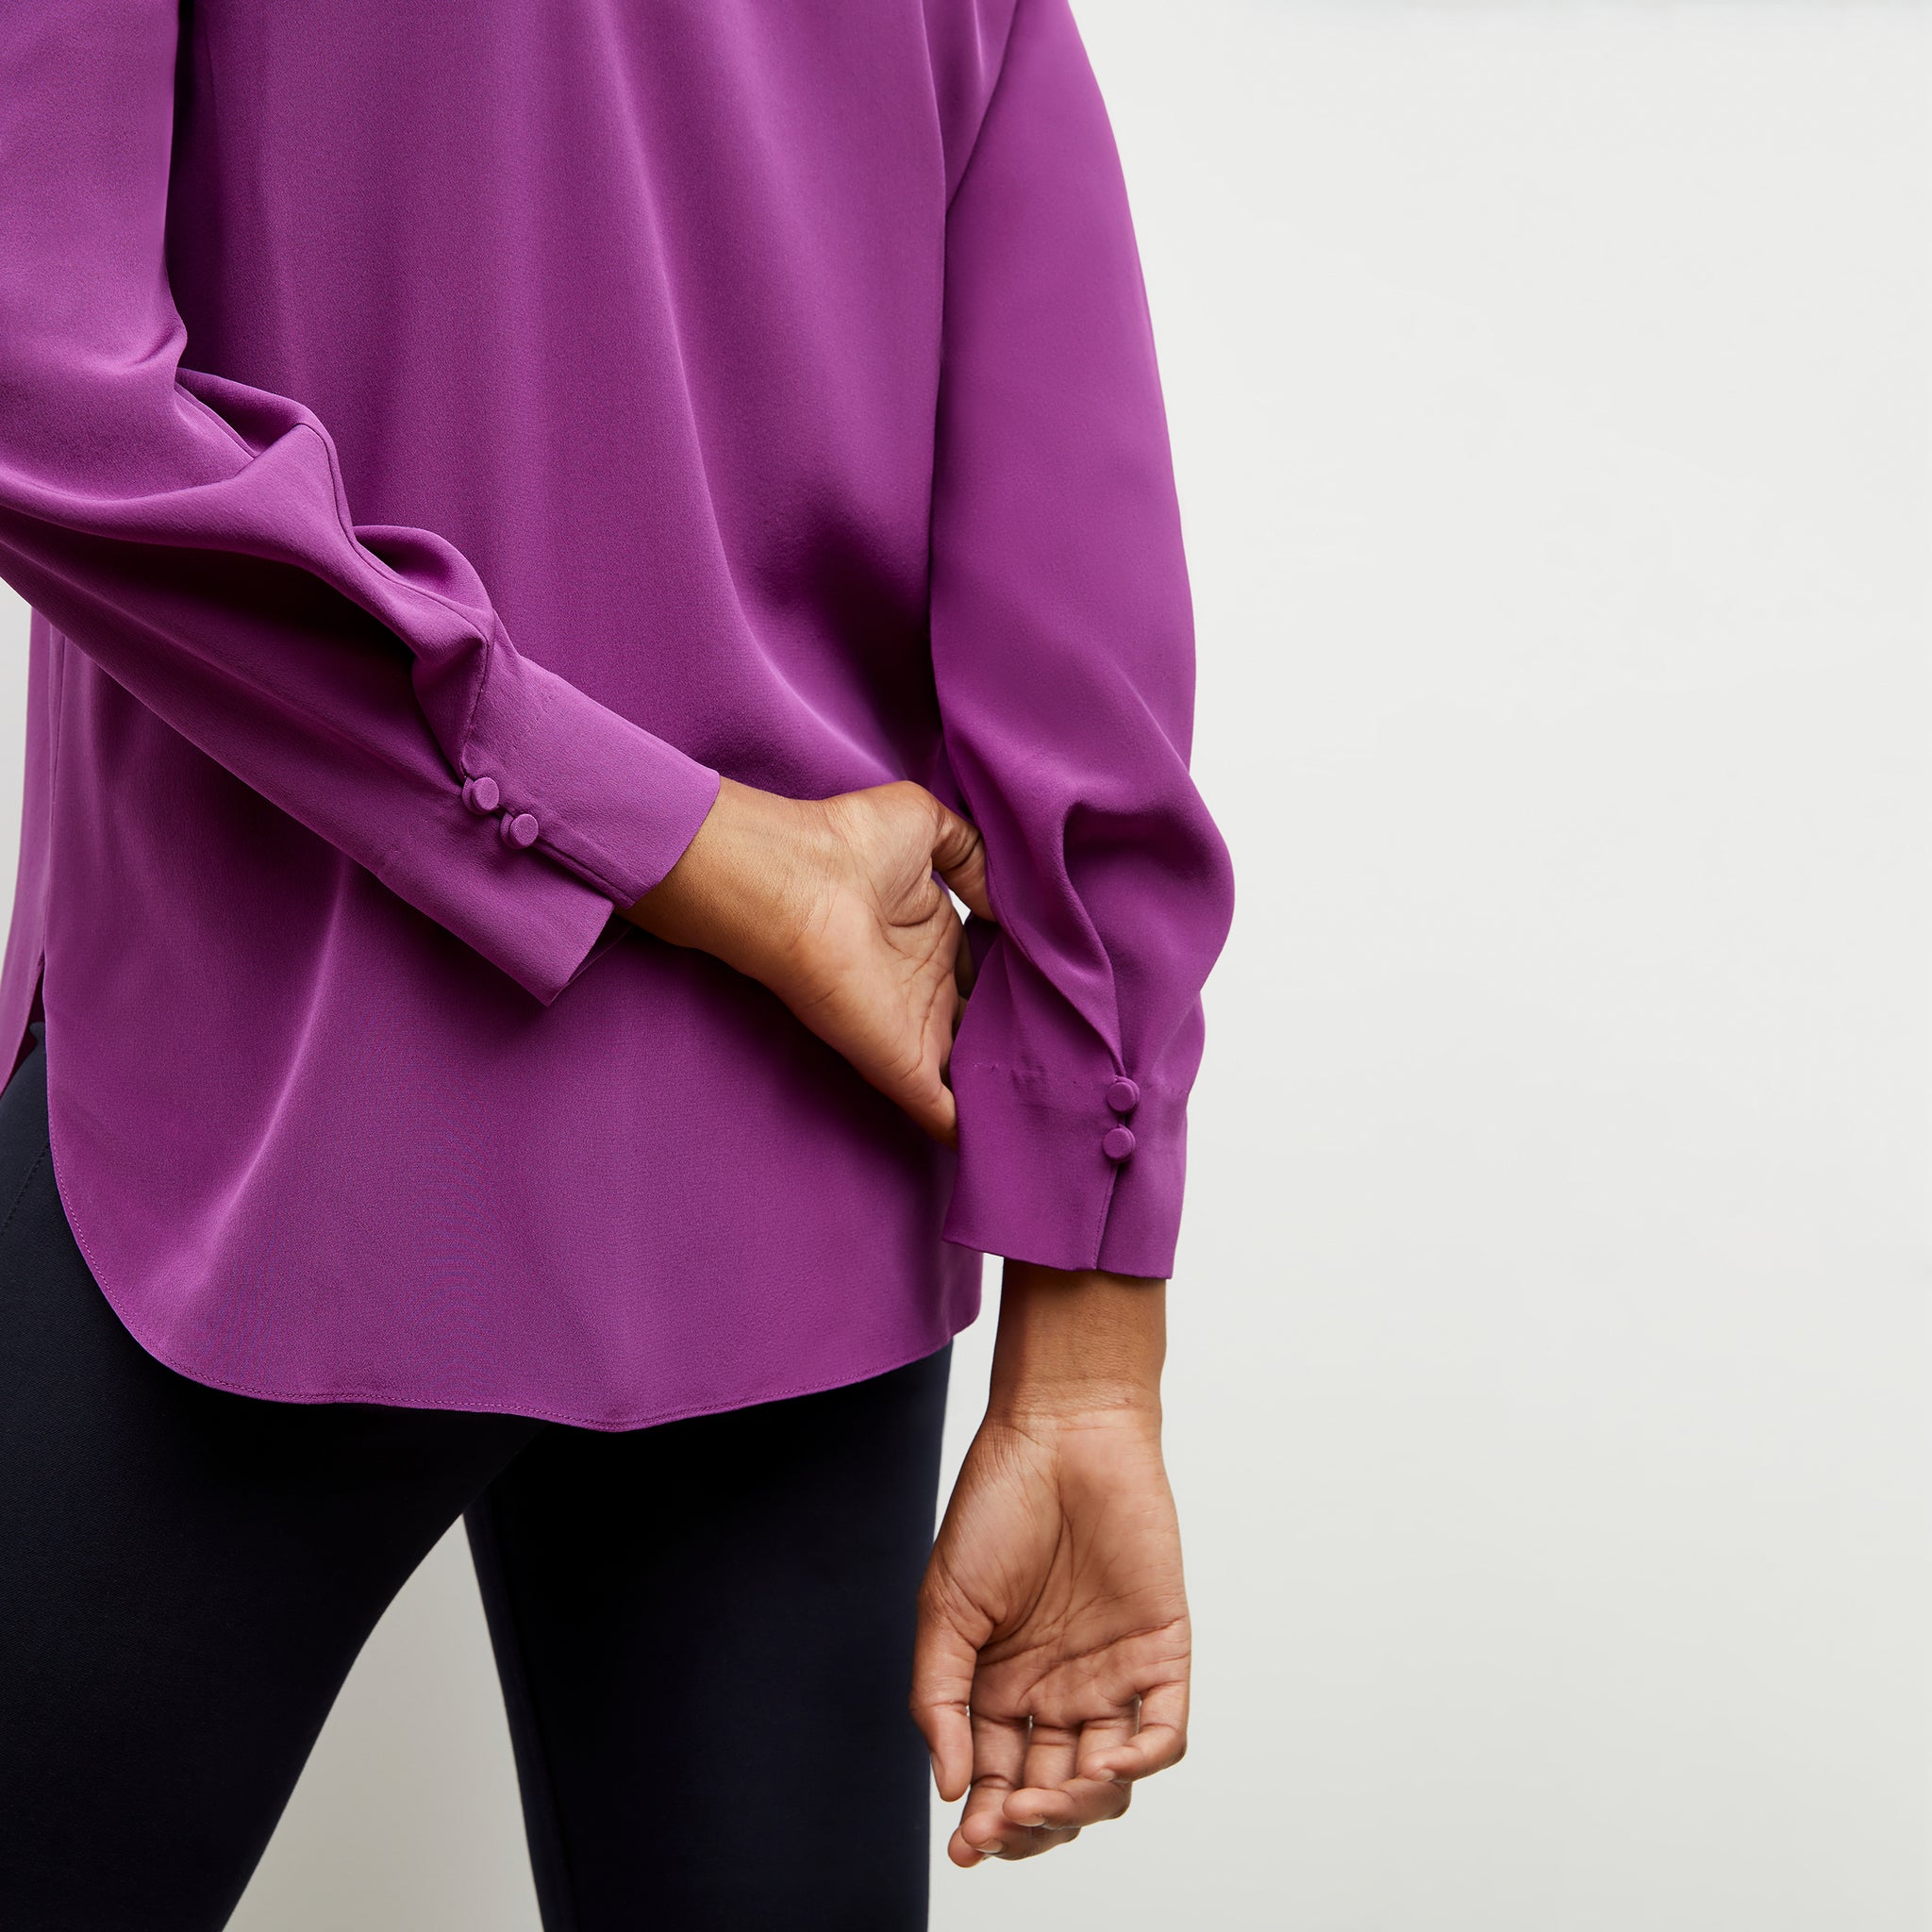 Back sleeve detail image of a woman wearing the Darcy Top in Purple Jasper